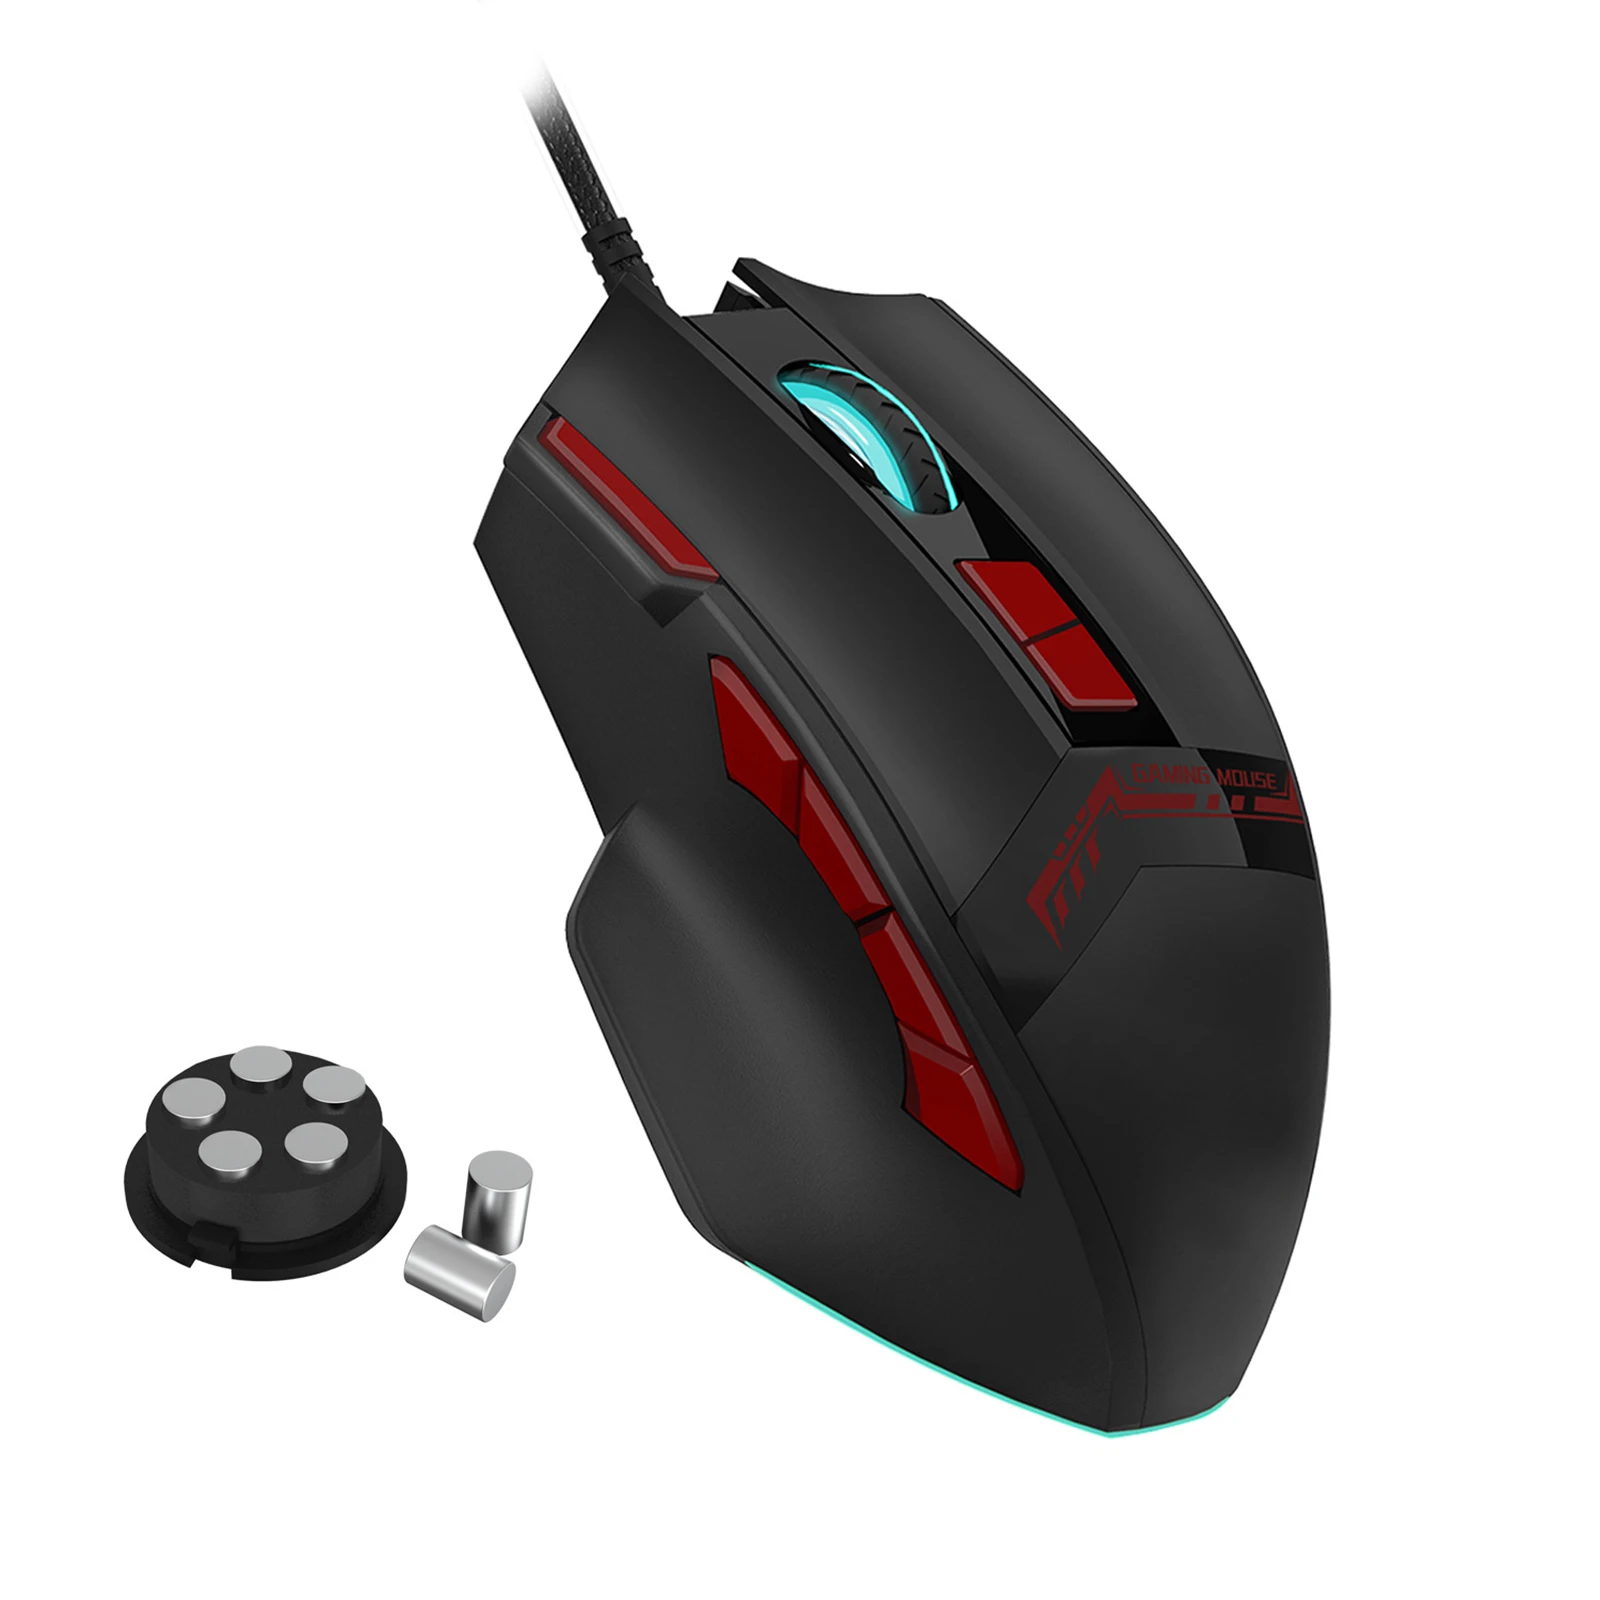 

Wired Mouse 10 Buttons USB Gaming Mouse With RGB Light 1000/1600/2400/3200DPI Weight Tuning For Desktop Laptop